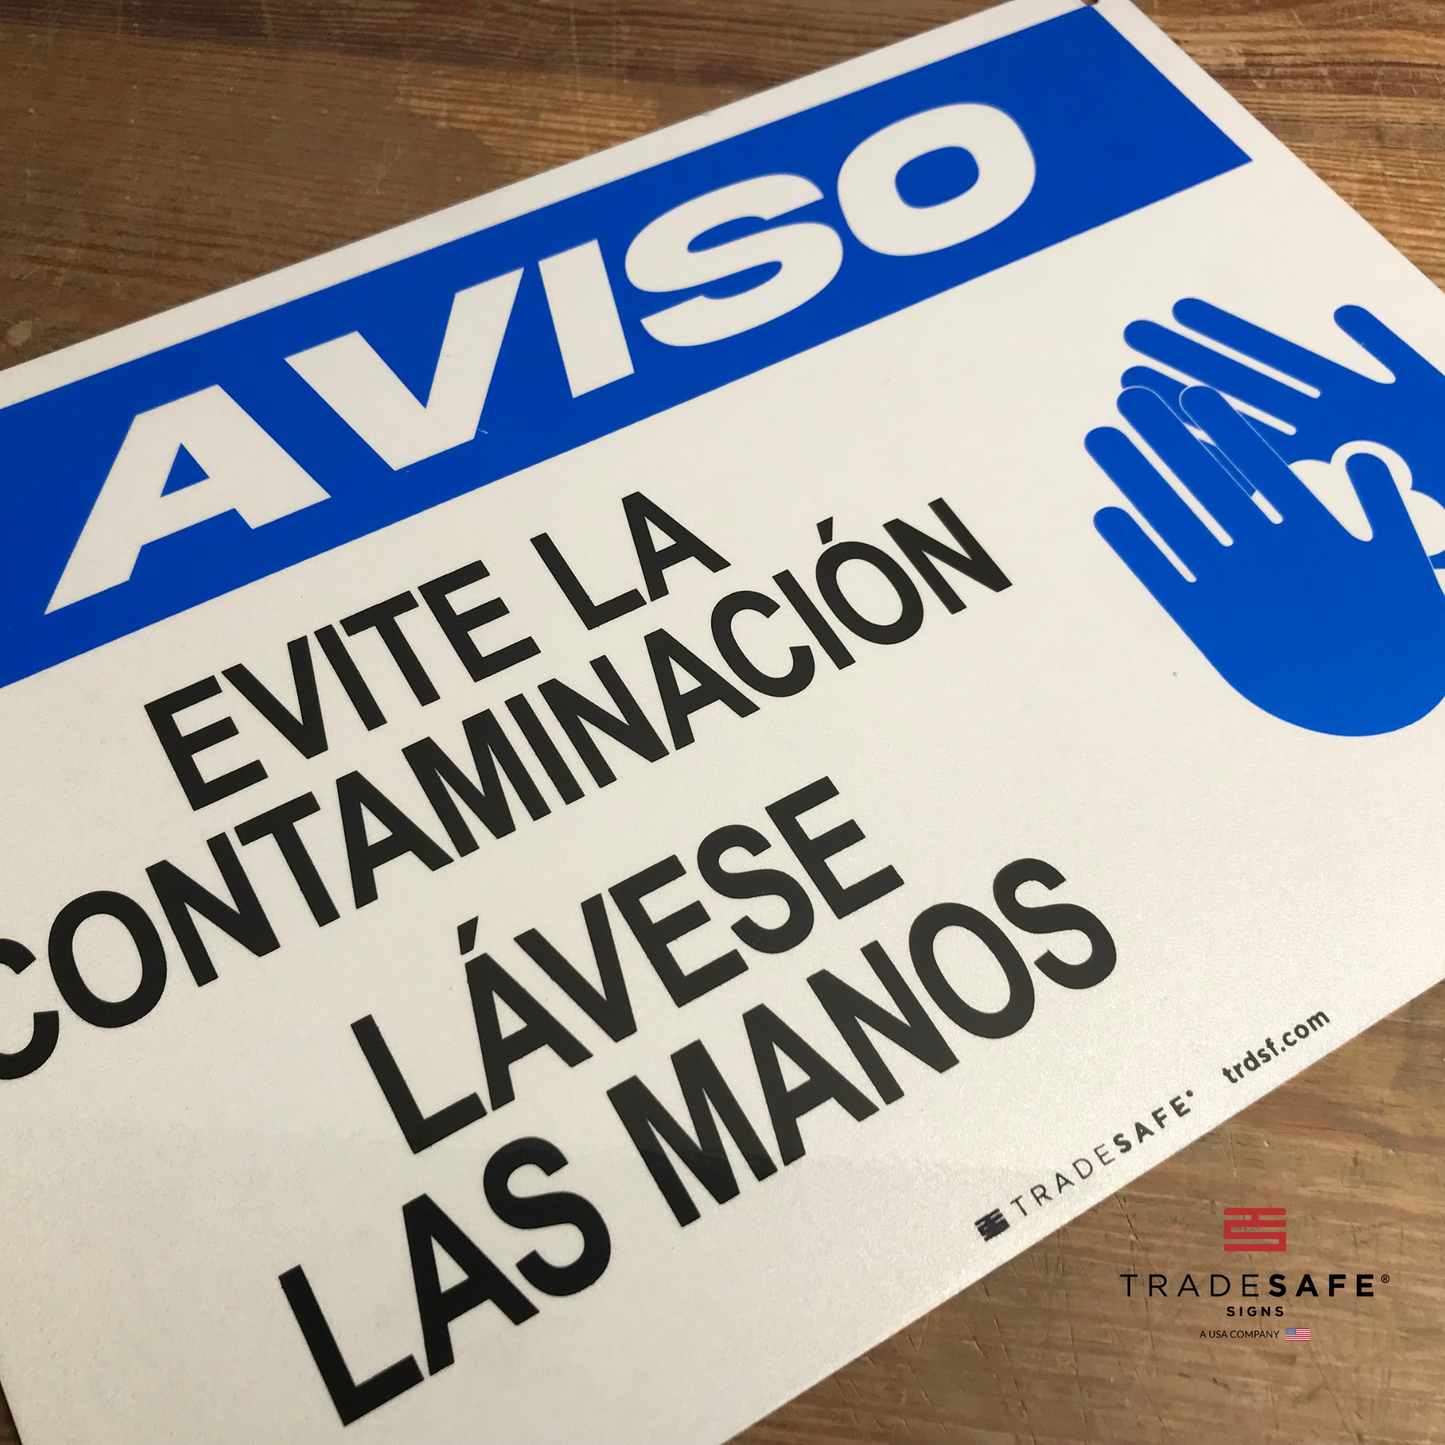 vibrant and highly visible wash your hands sign in spanish